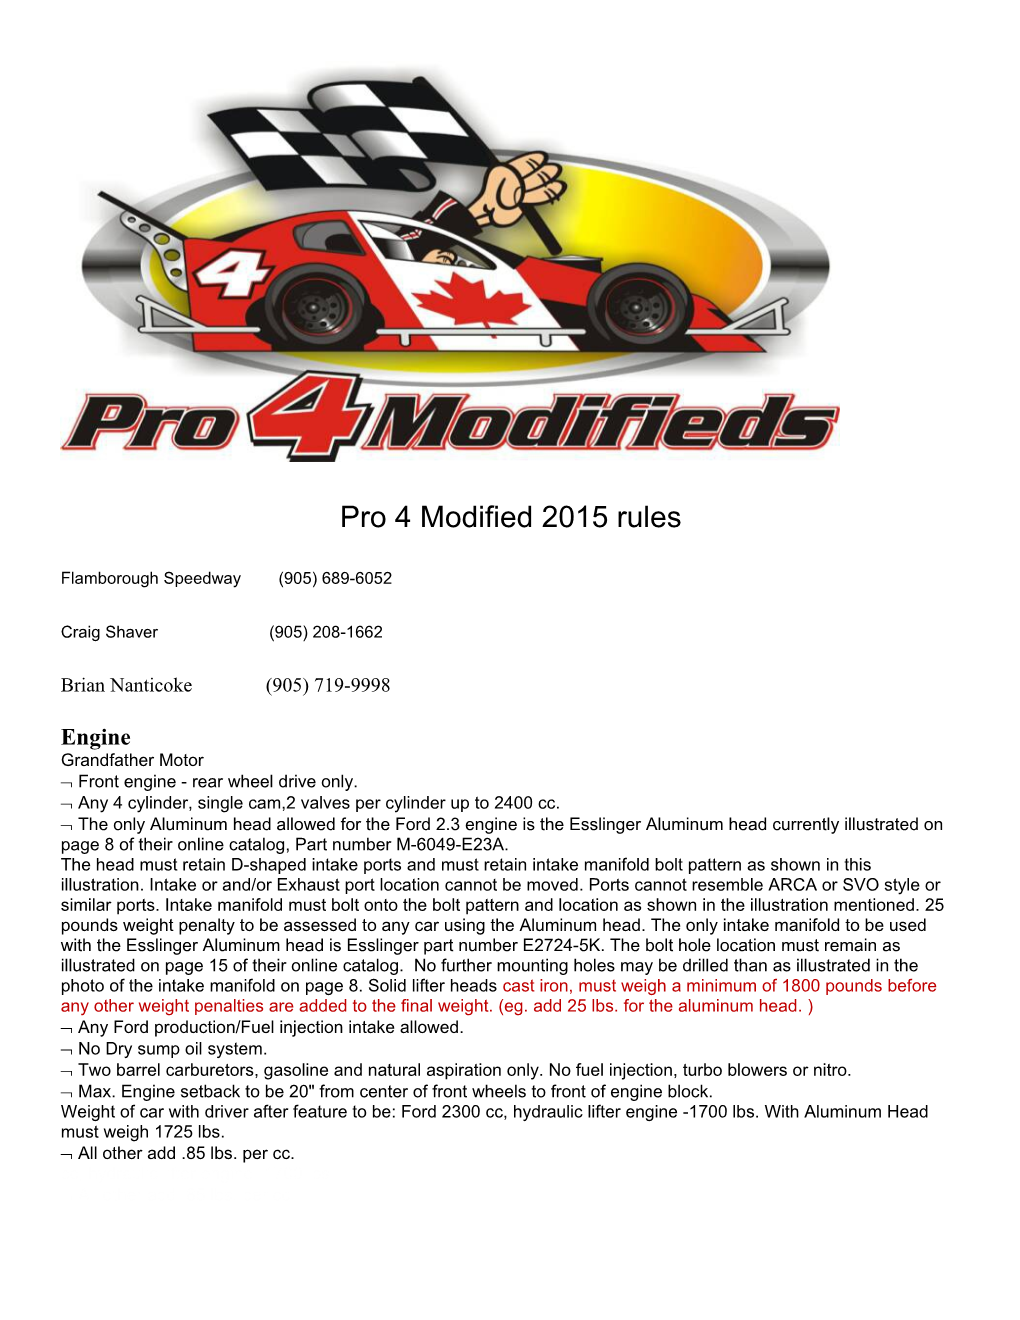 Pro 4 Modified 2015 Rules